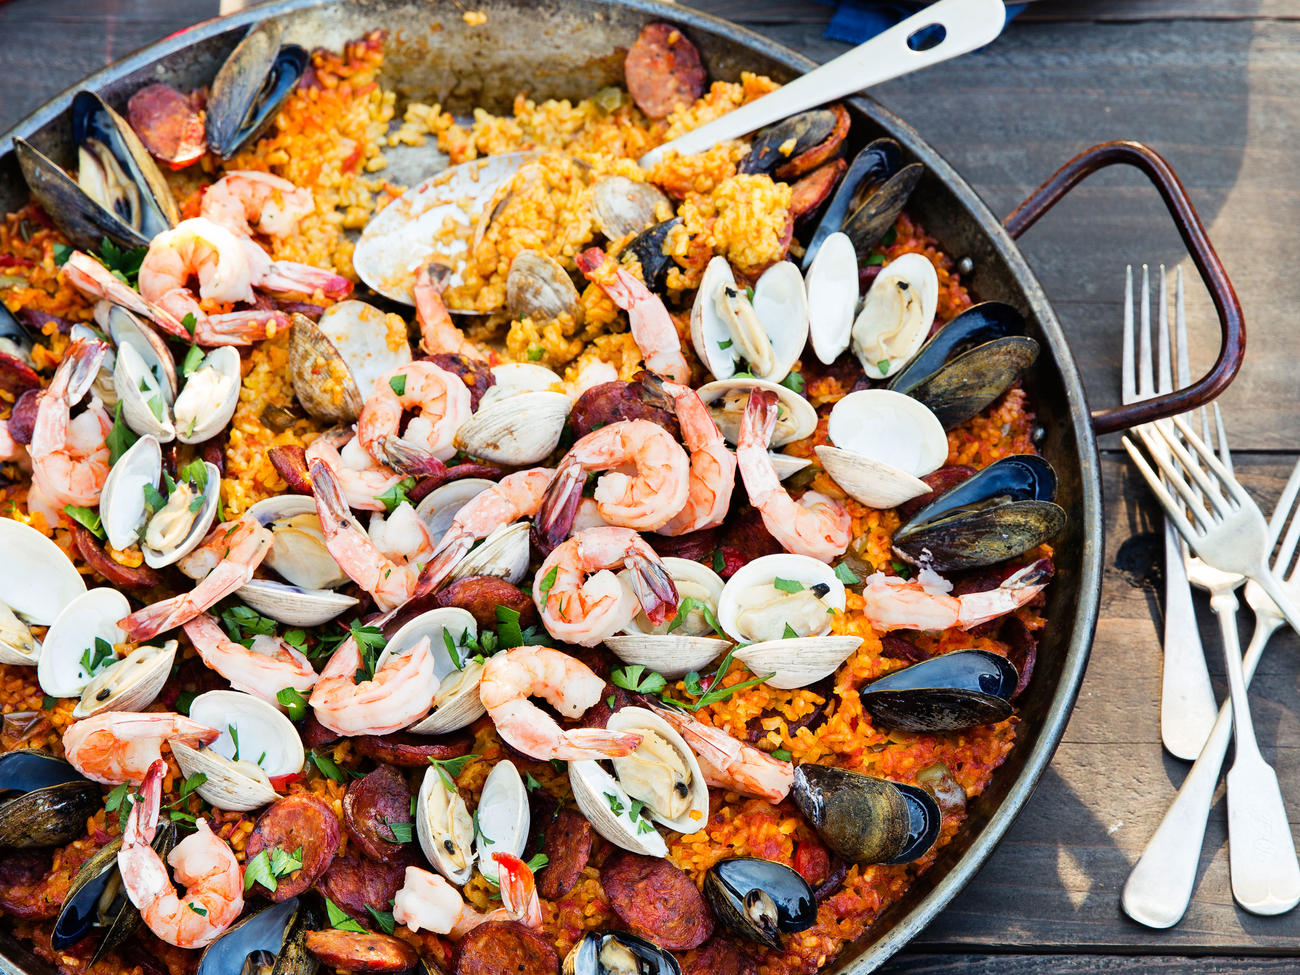 Let’s Throw a Paella Party! Here’s the Menu